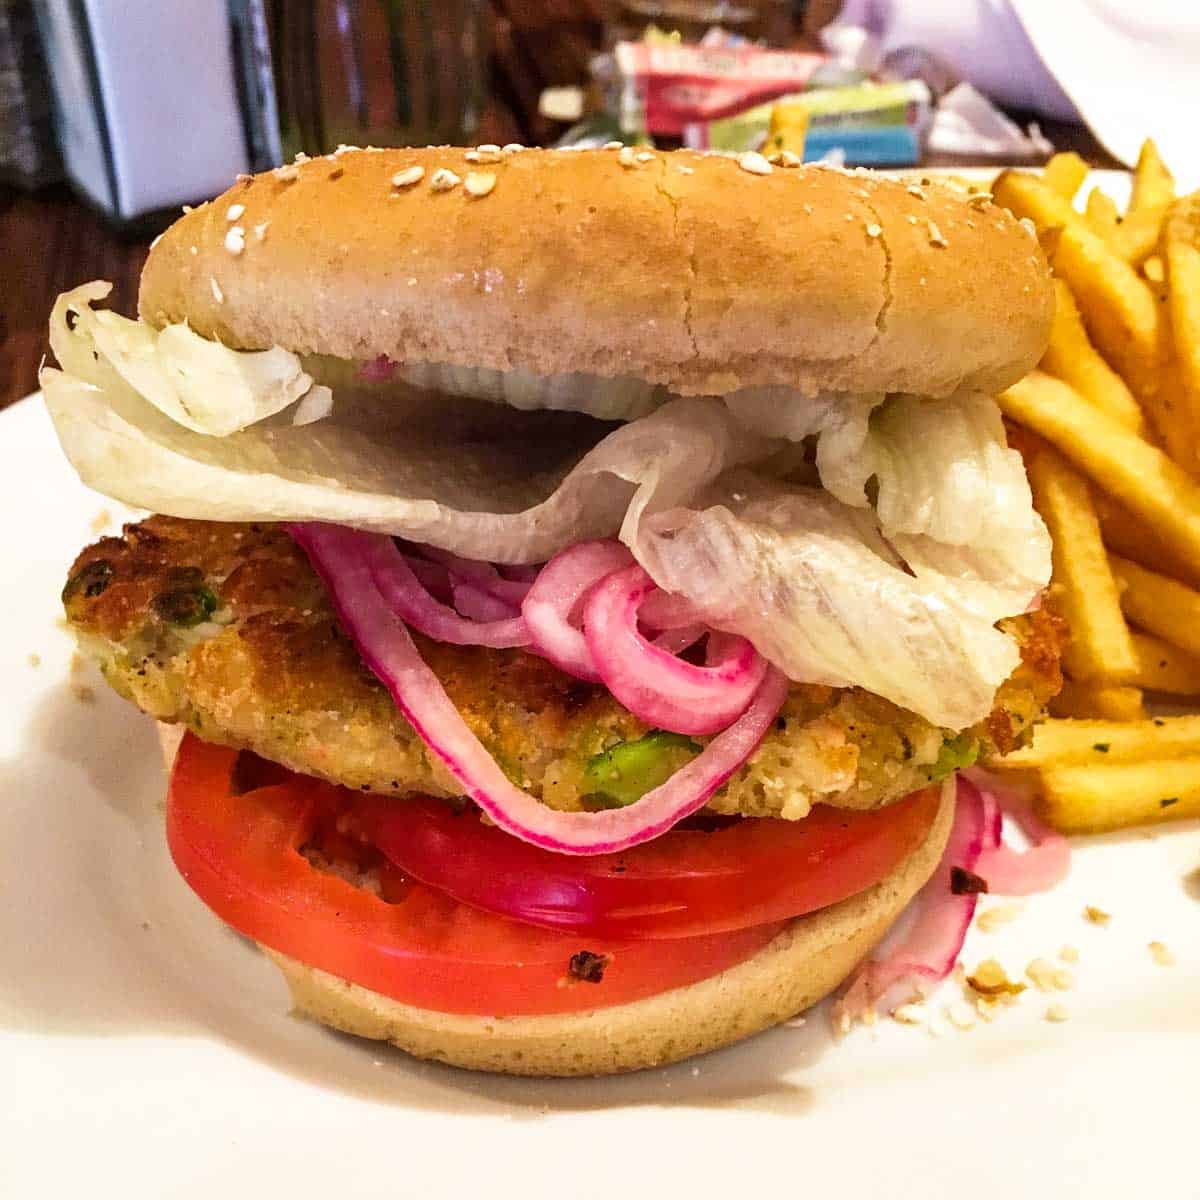 Front view of a veggie burger topped with tomatoes, red onions and lettuce with fries.